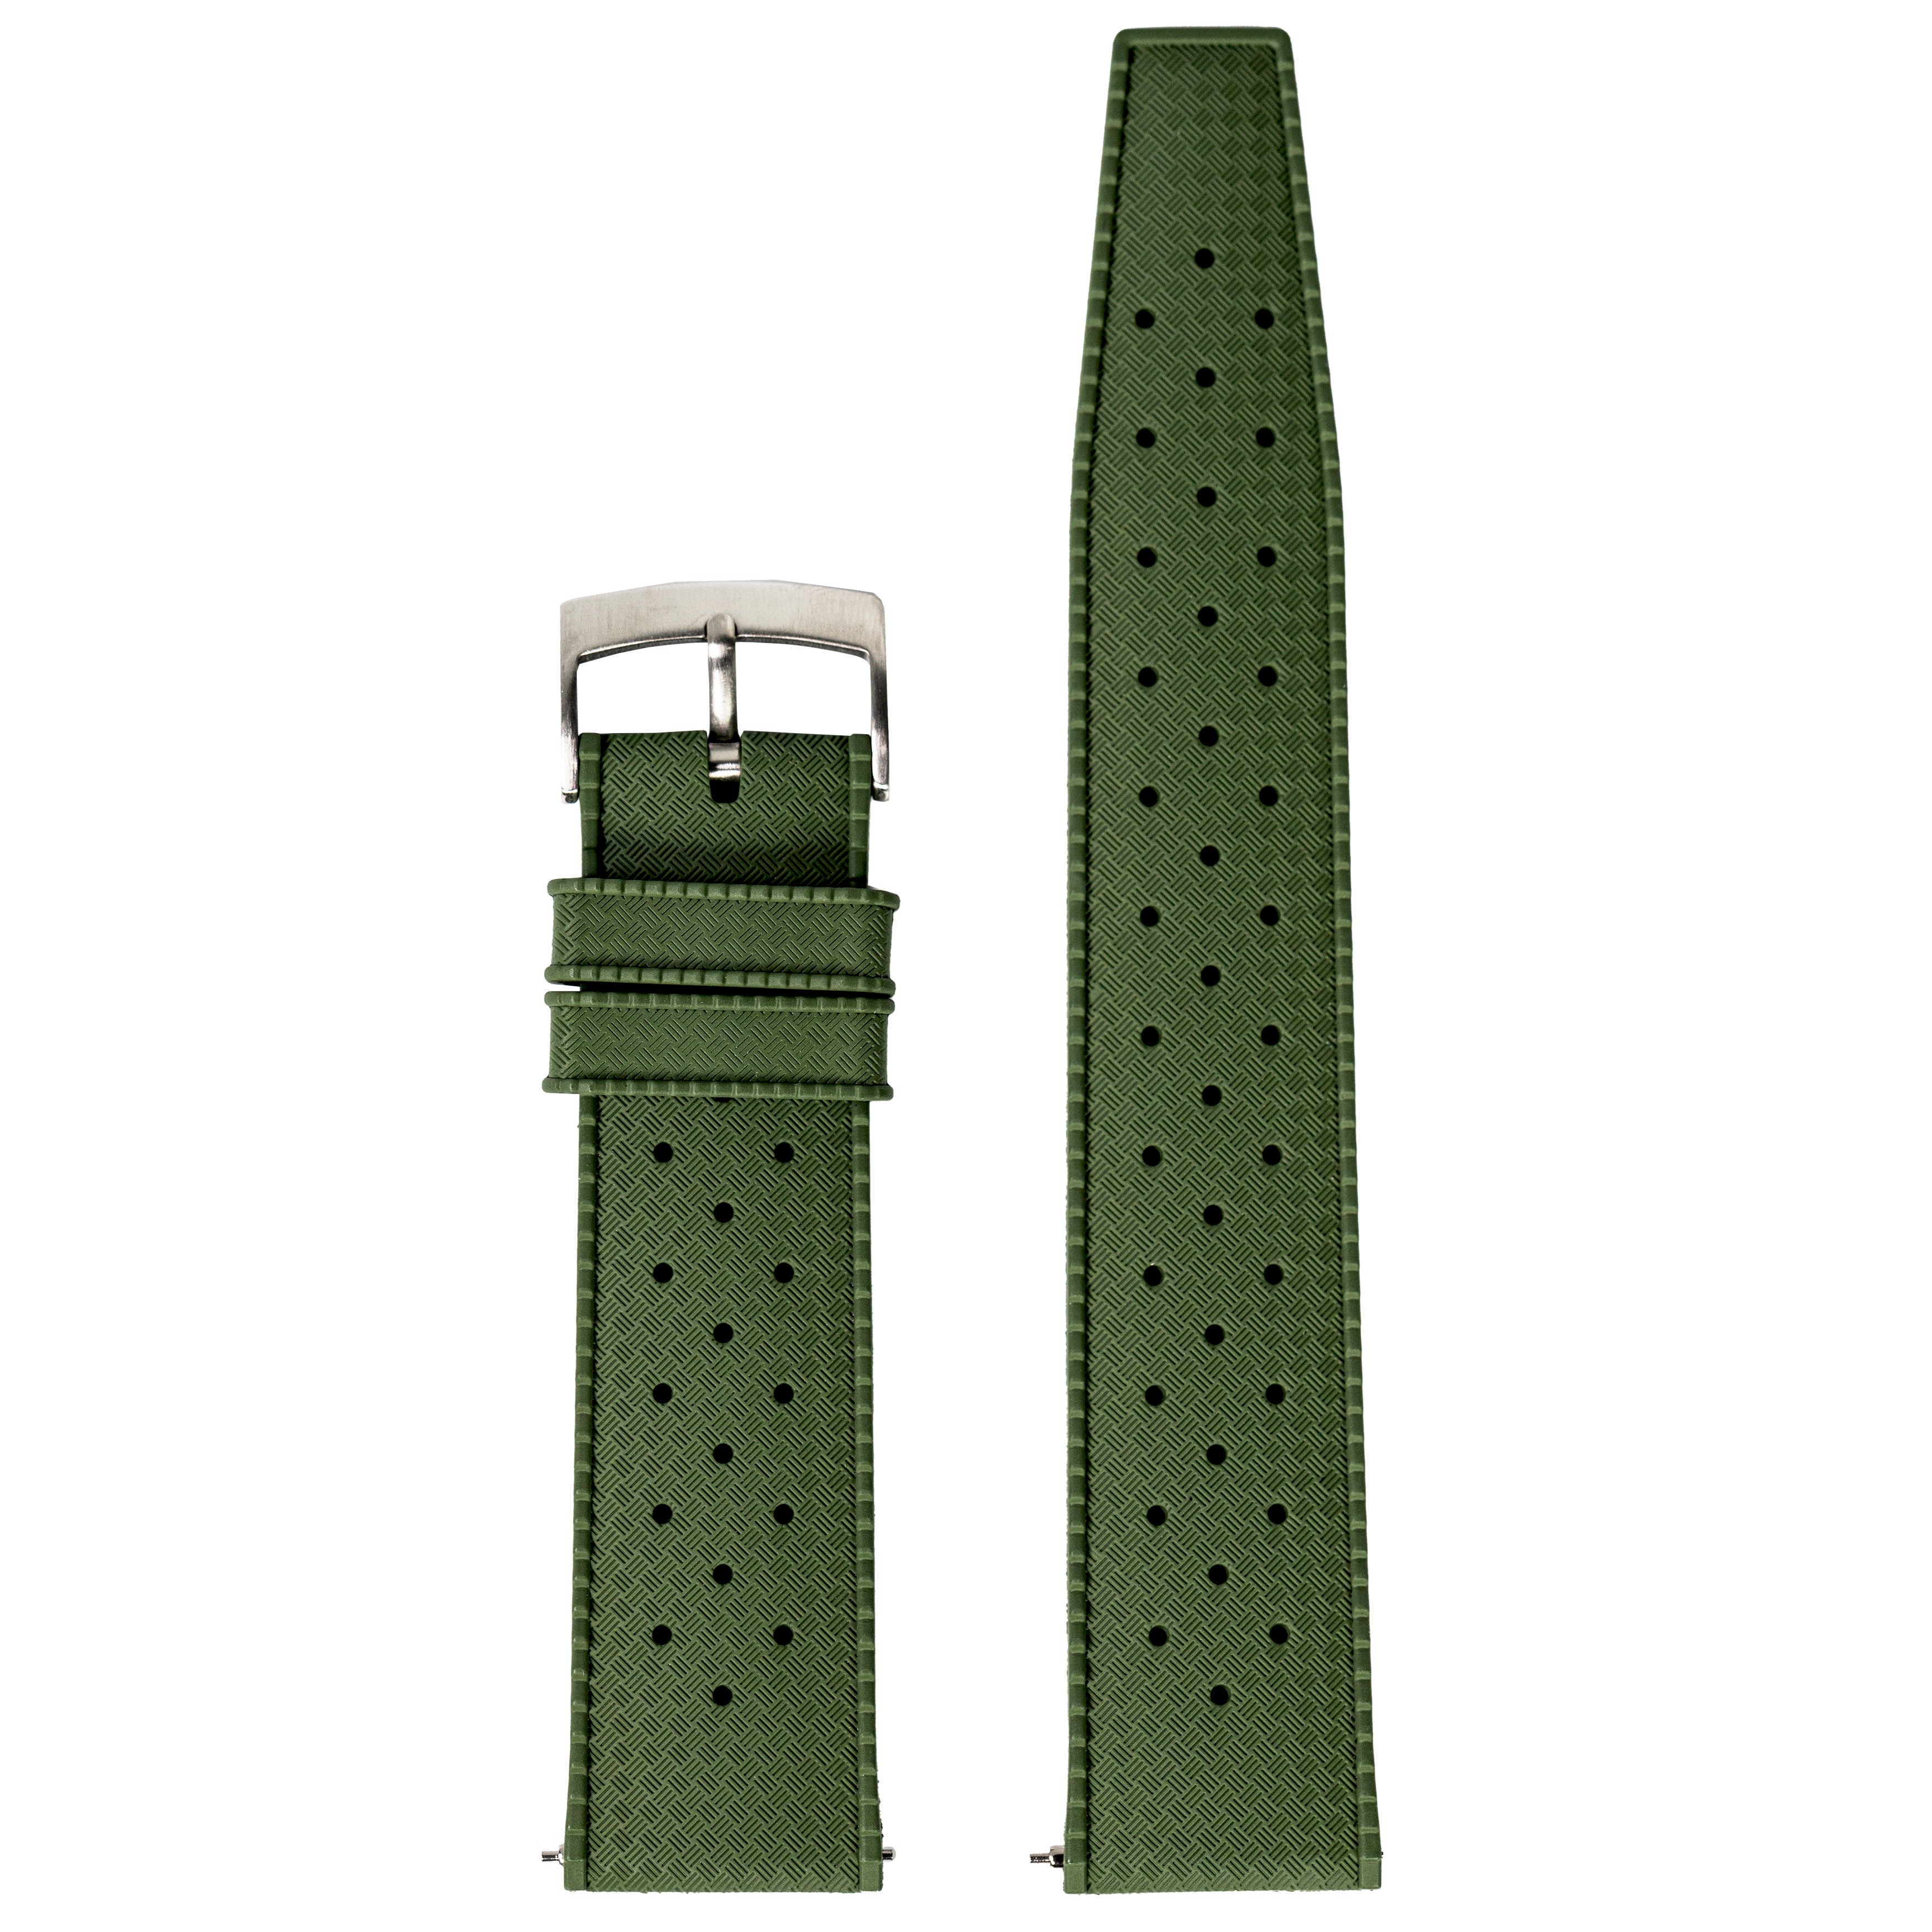 [Quick Release] King Tropic FKM Rubber - Forest Green